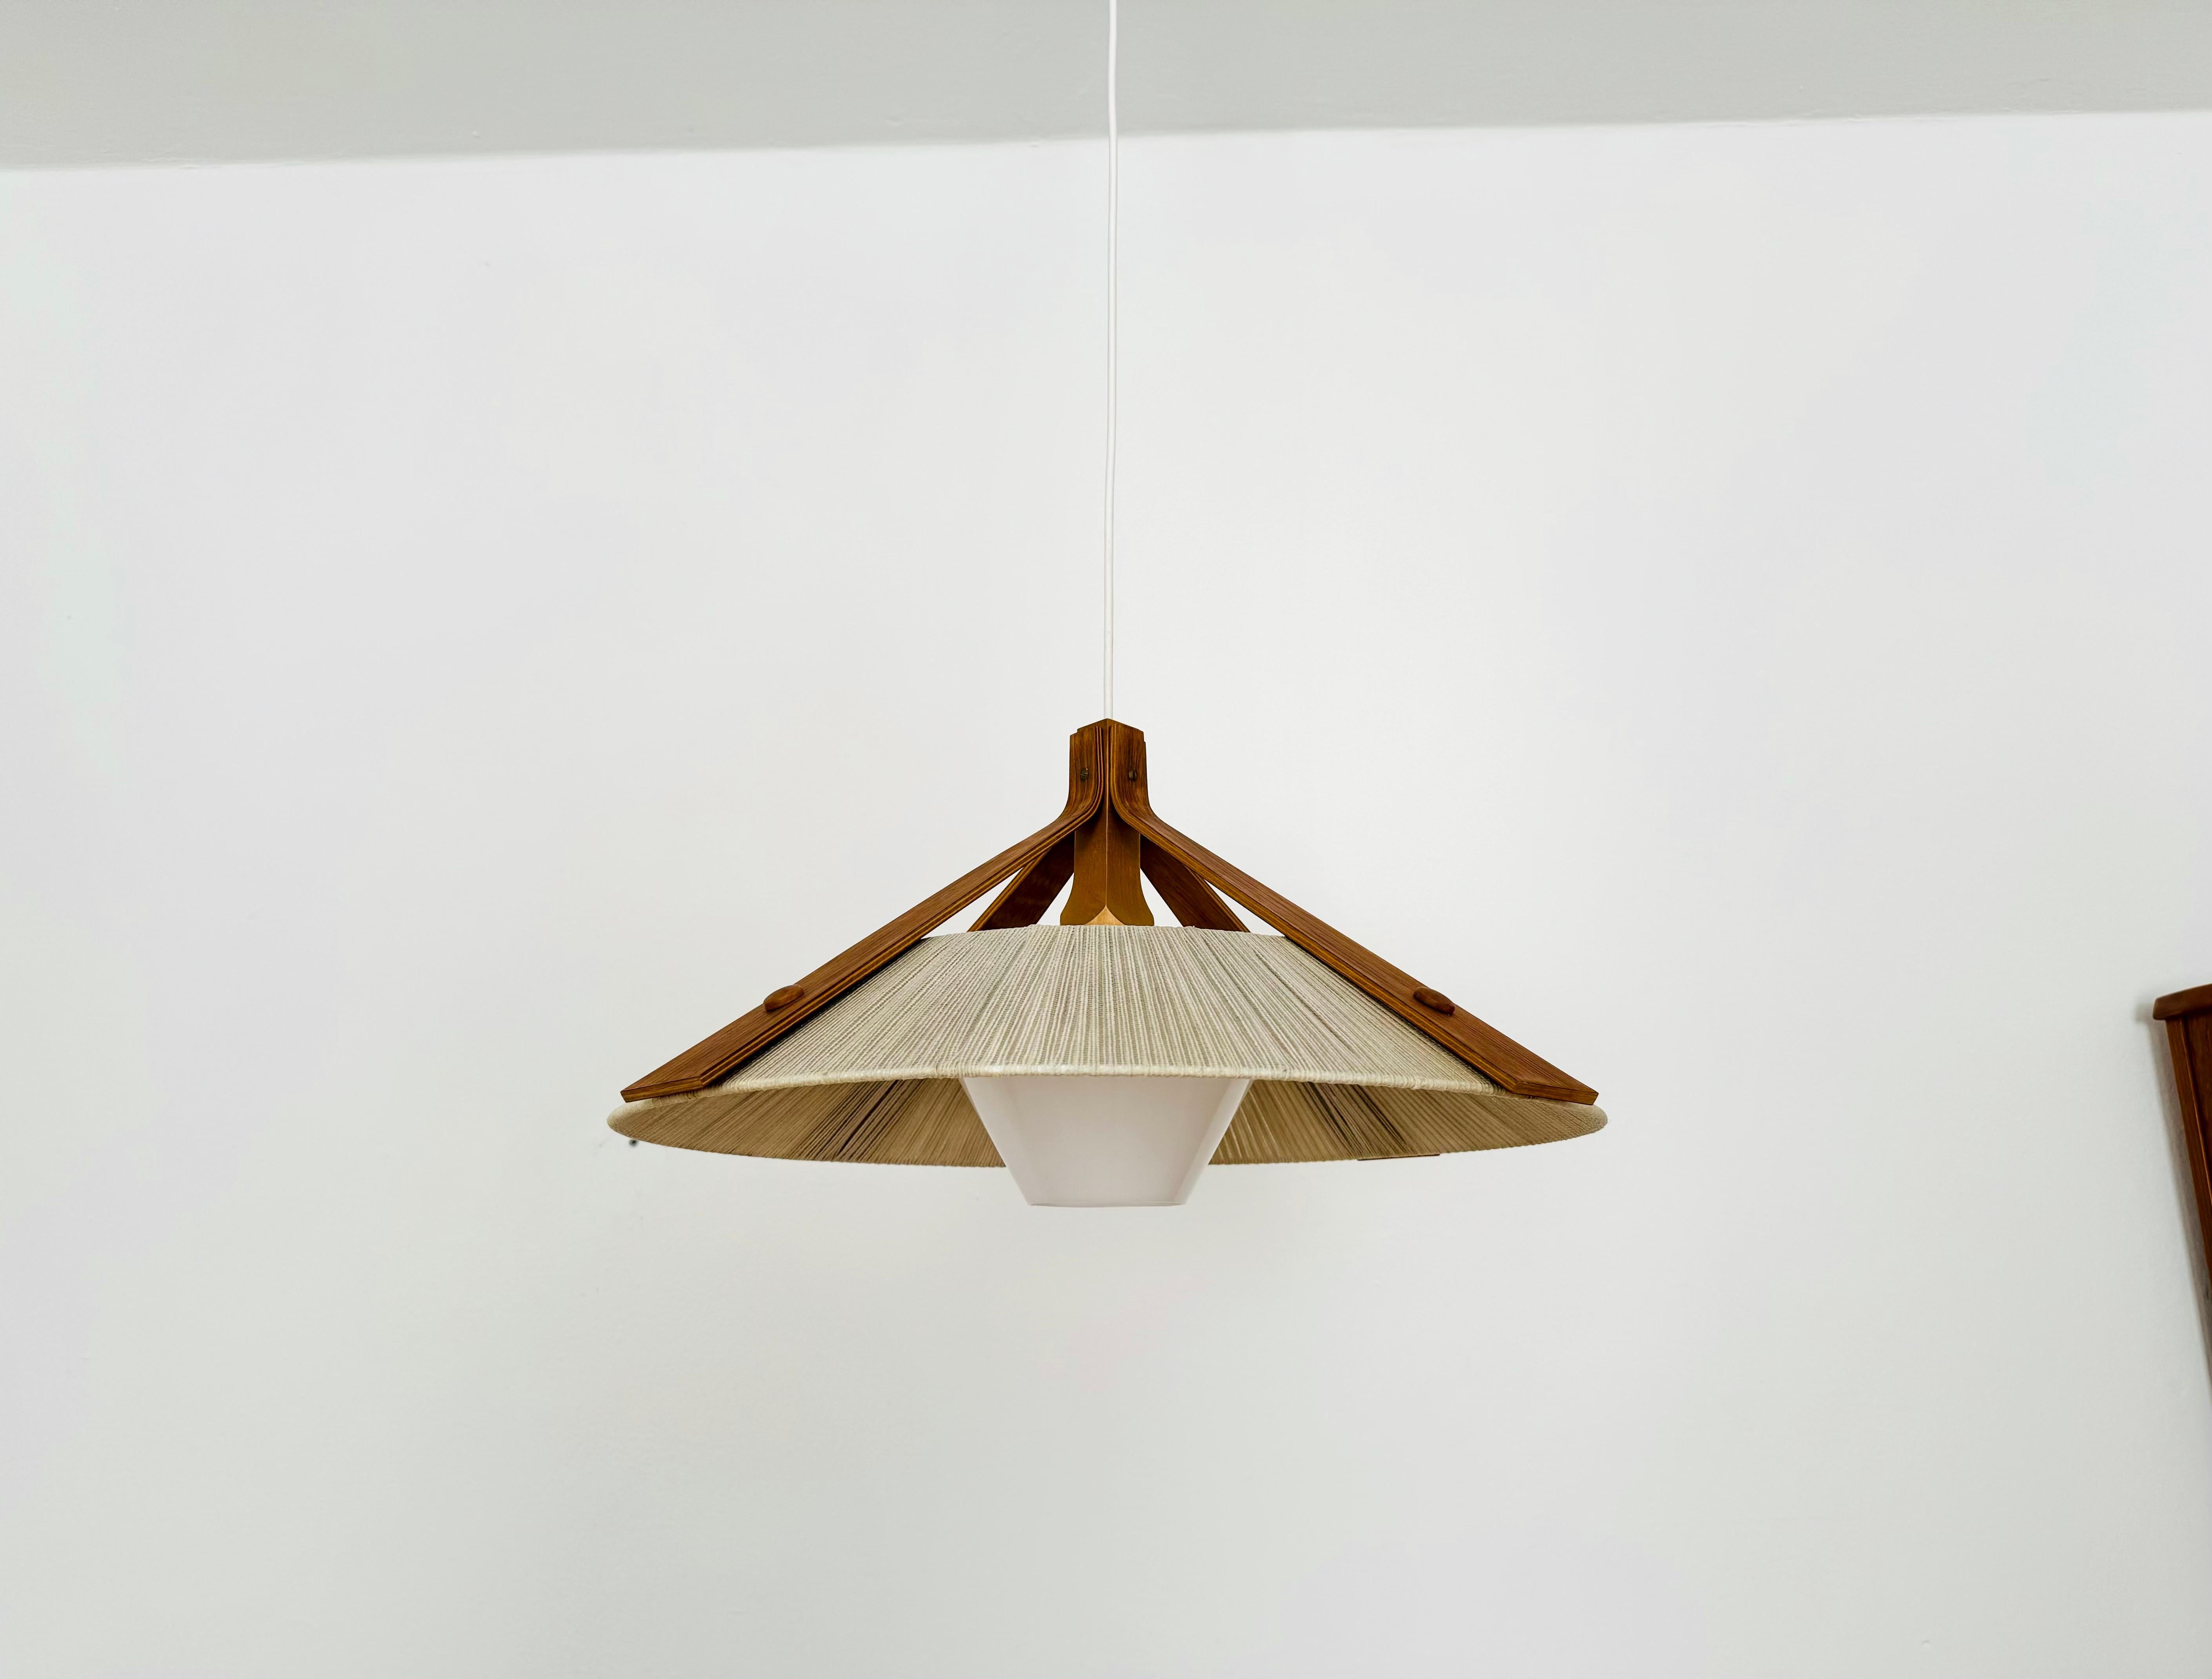 Exceptionally beautiful and large pendant lamp from the 1960s.
The design is very unusual.
The shape and materials create a warm and very pleasant light.

Condition:

Good vintage condition with signs of wear consistent with age.
The raffia